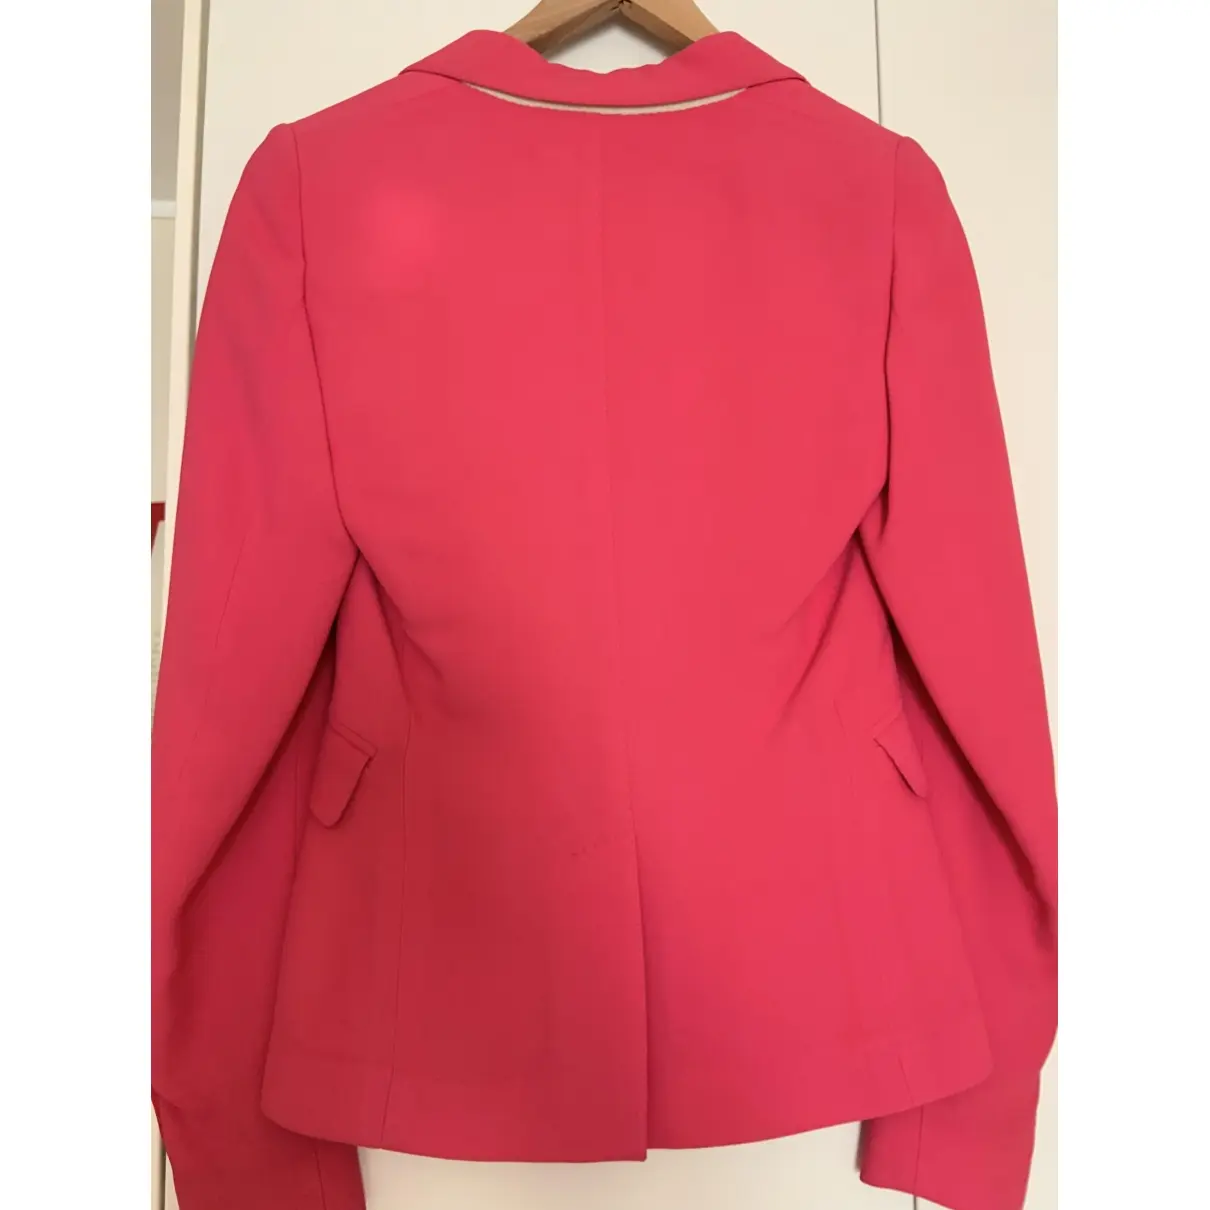 Luisa Beccaria Suit jacket for sale